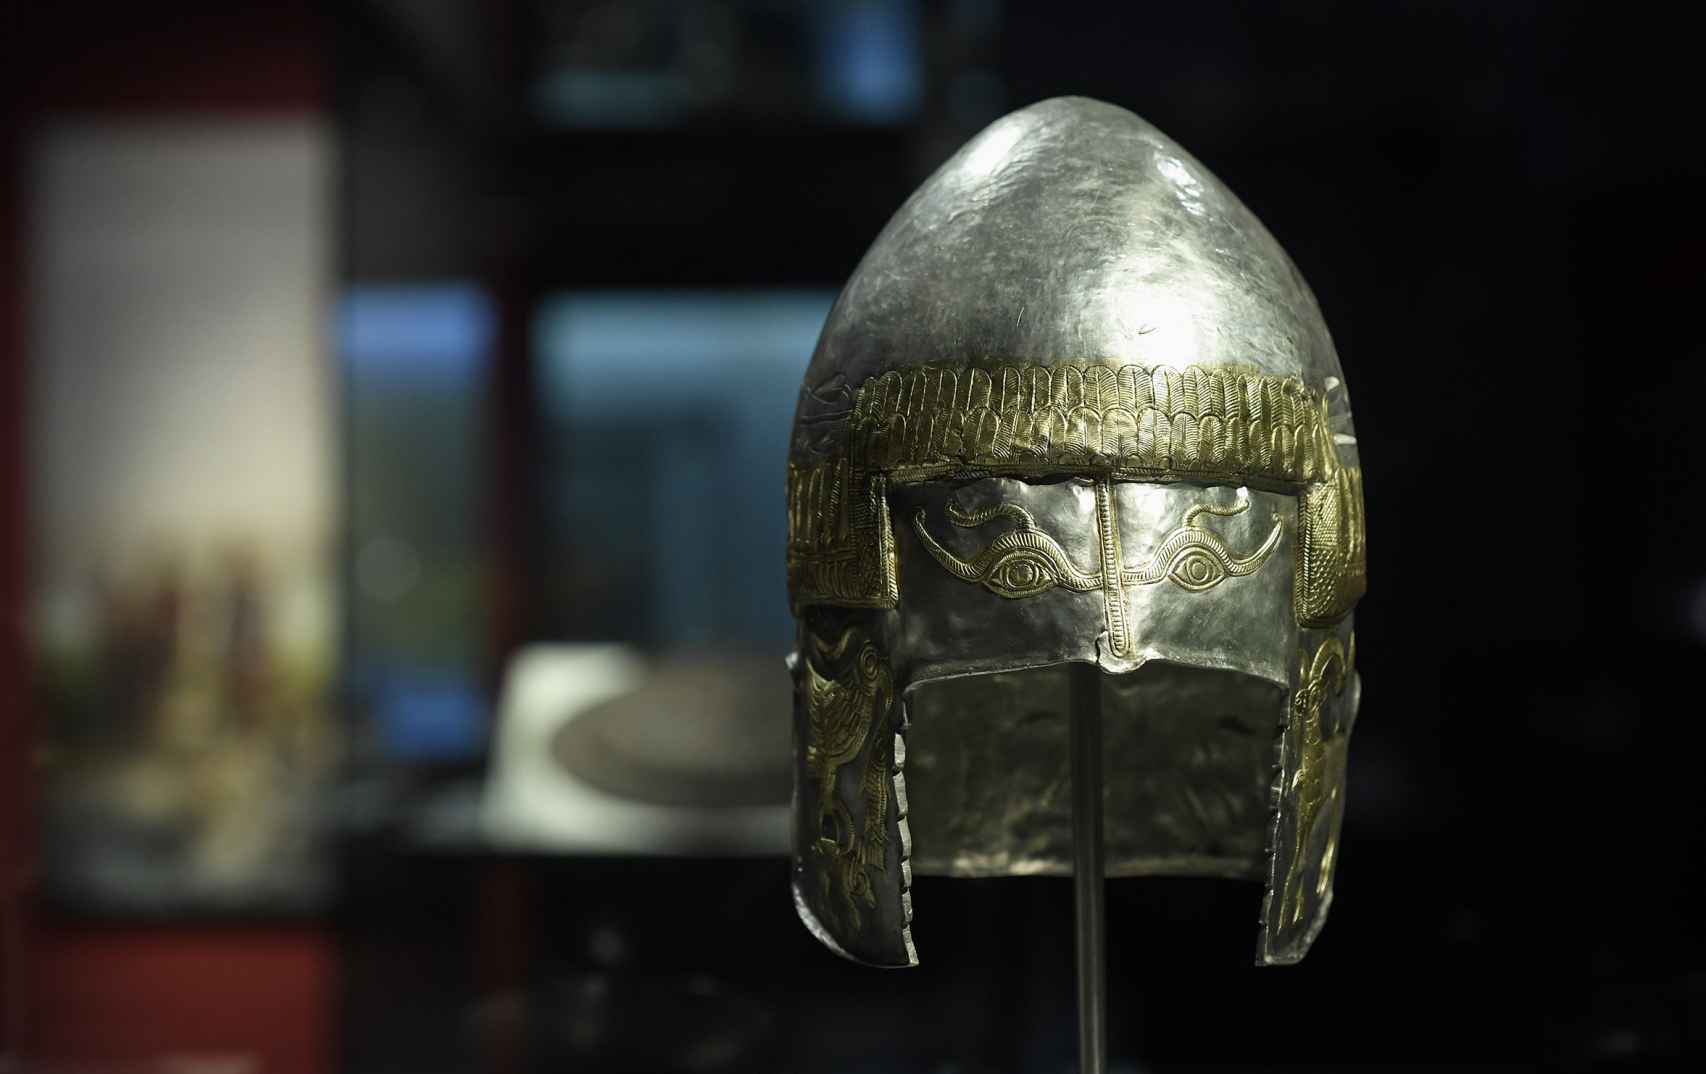 Another exceptional Dacian helmet from pre-Roman times.